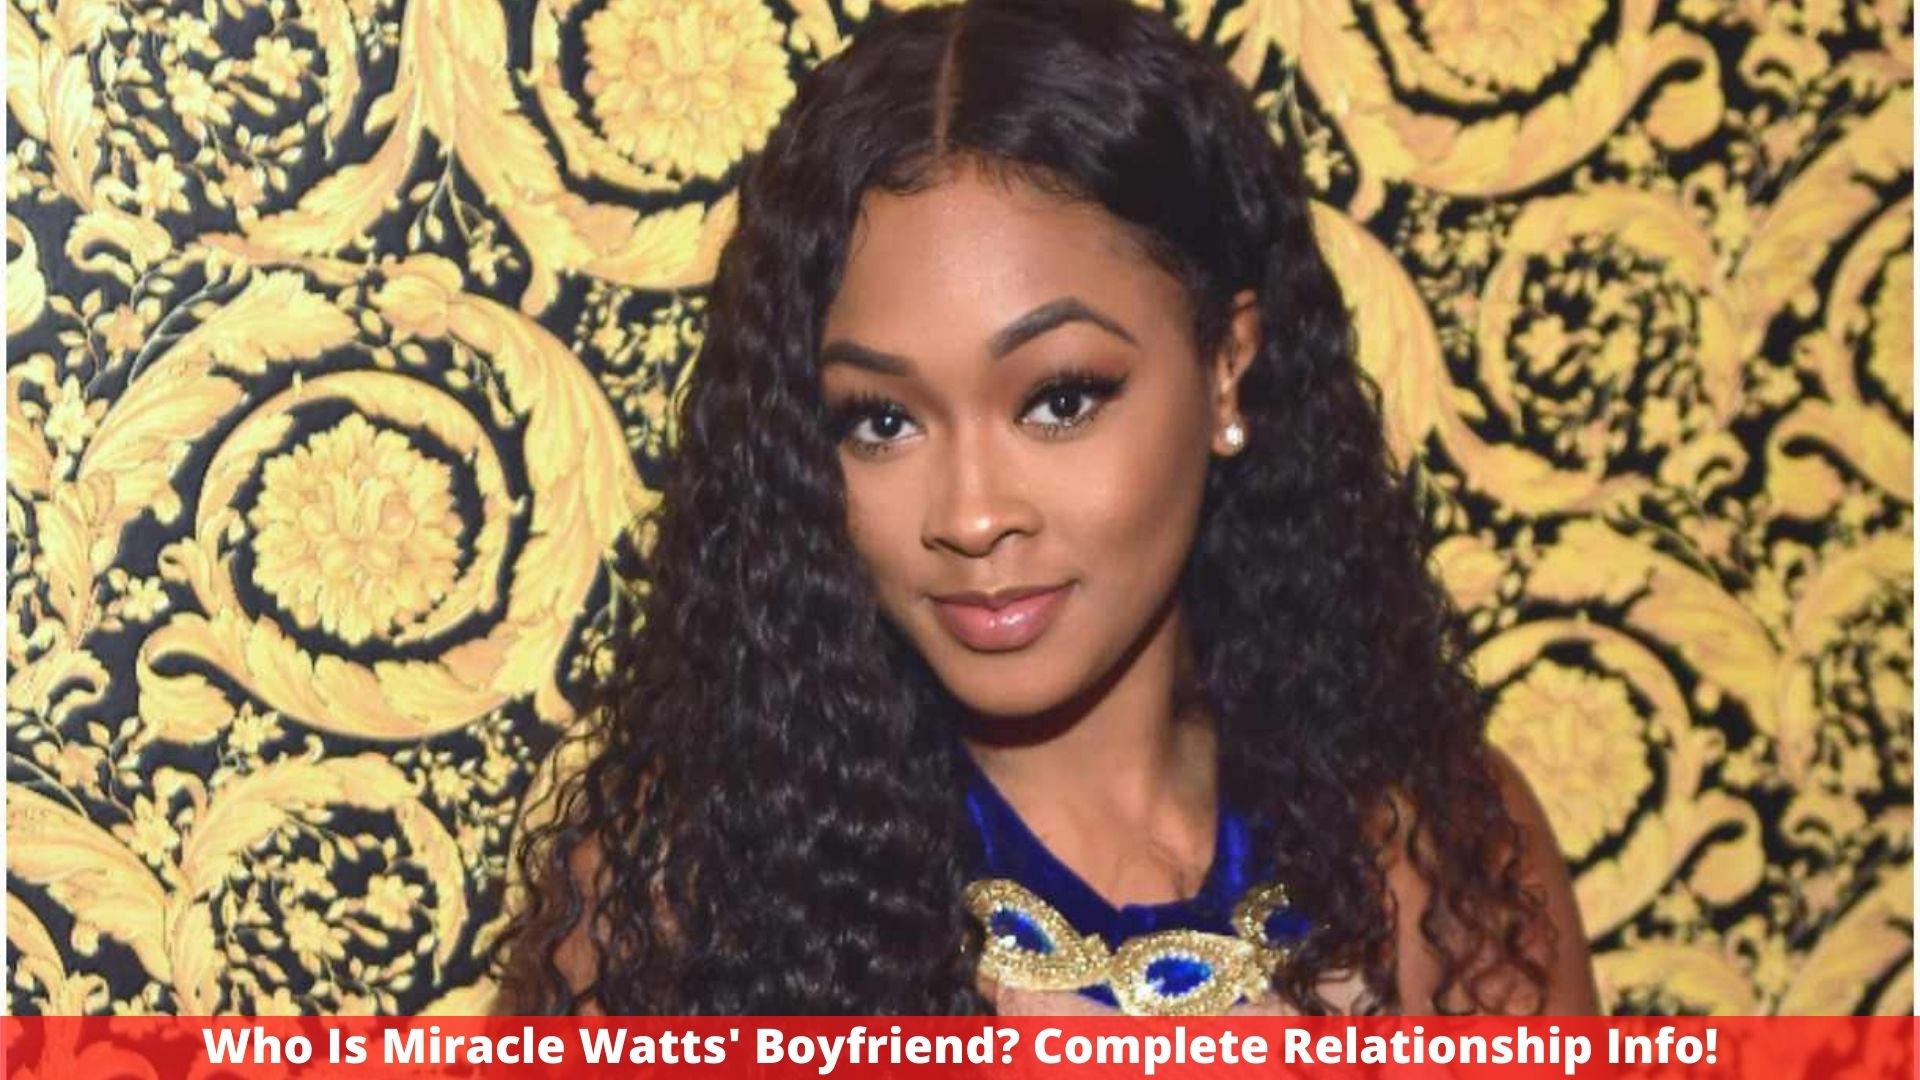 Who Is Miracle Watts' Boyfriend? Complete Relationship Info!